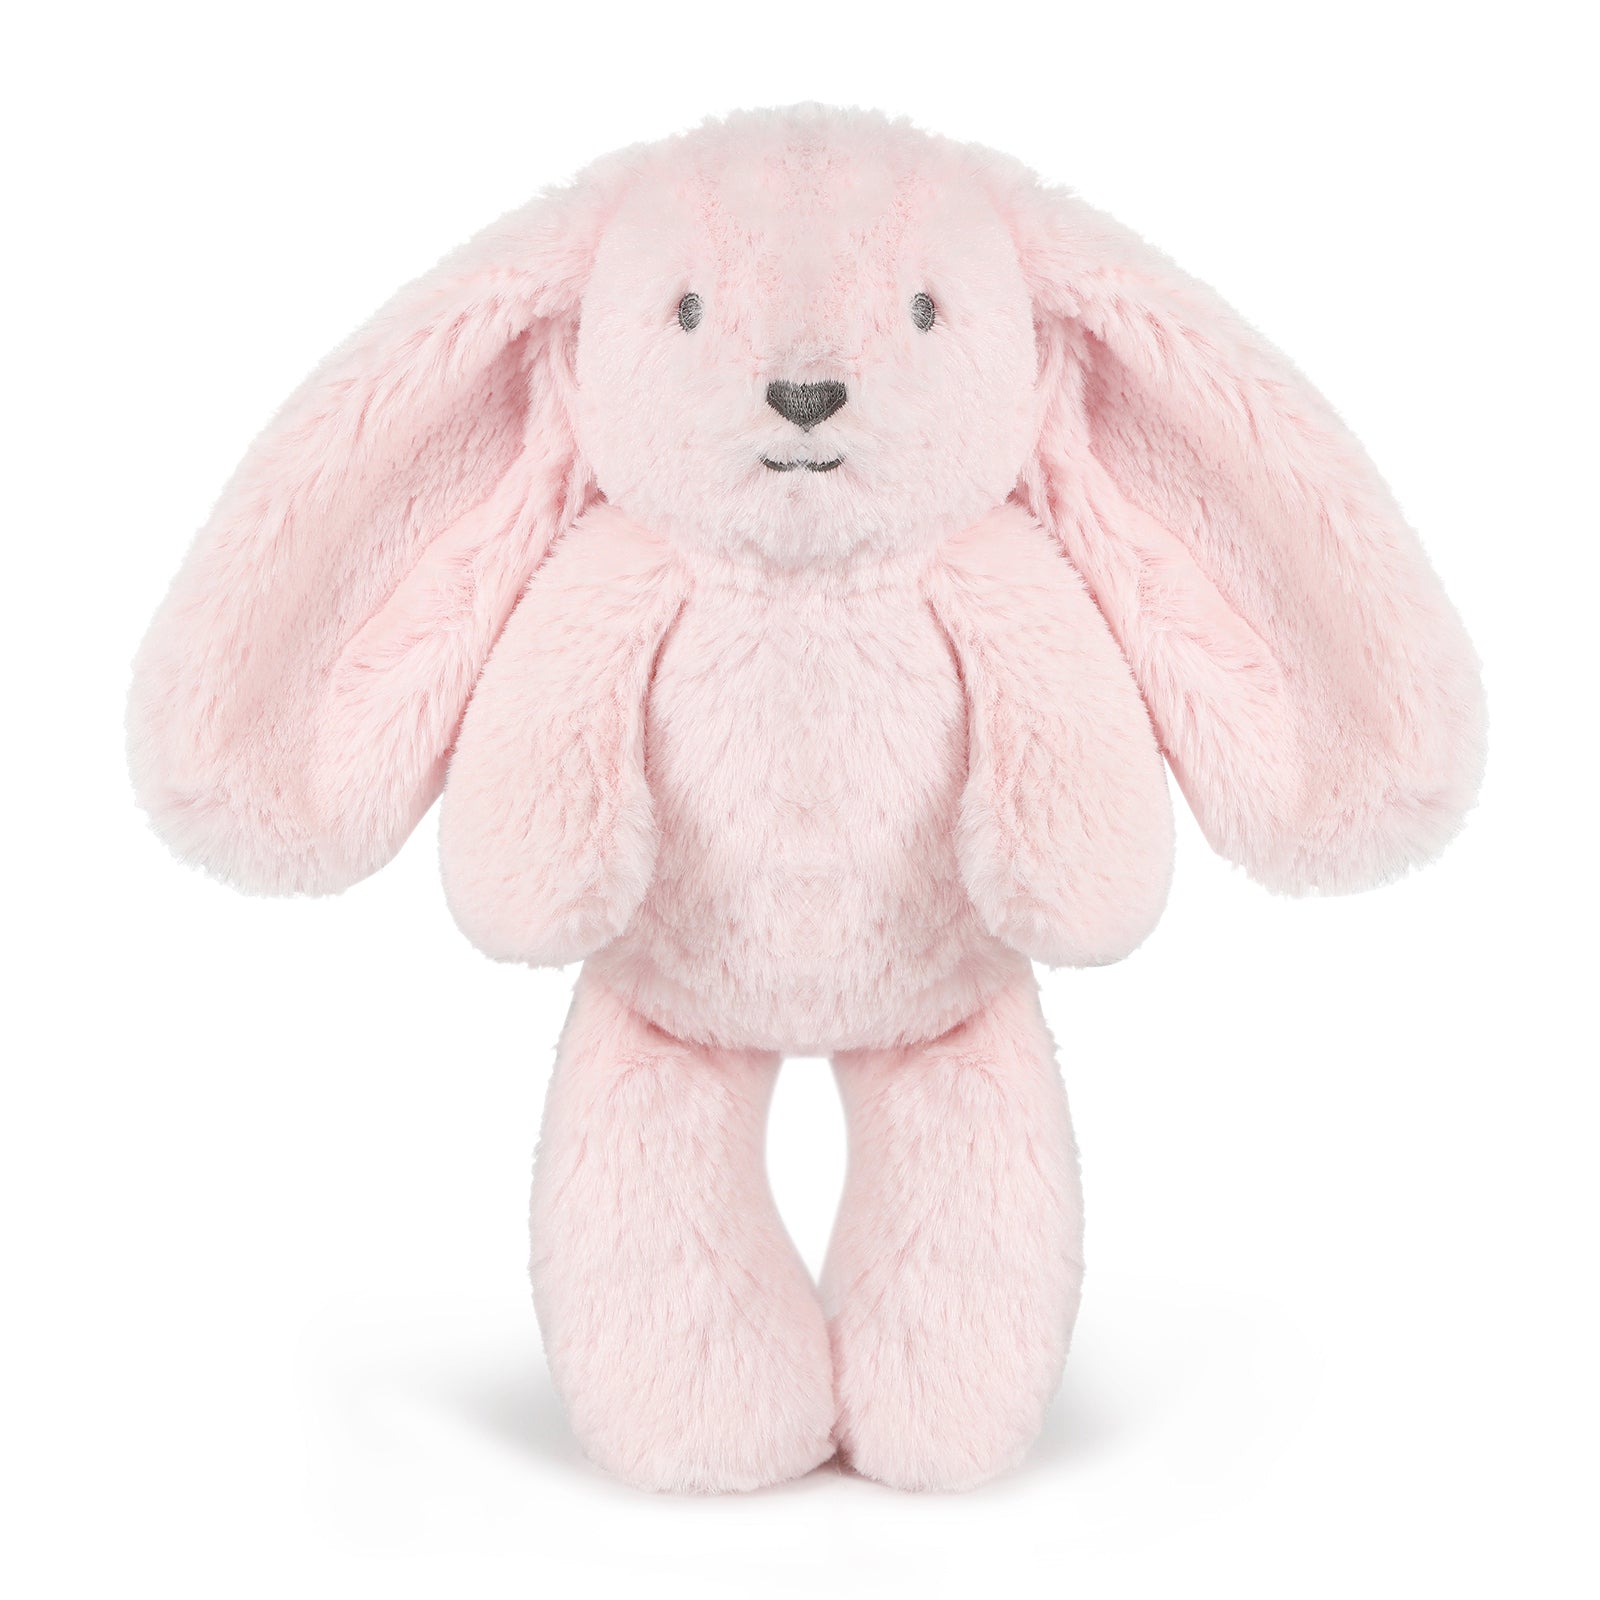 Stuffed Animals Plush Toys Bunny Pink - Betsy Bunny Huggie ages 0+